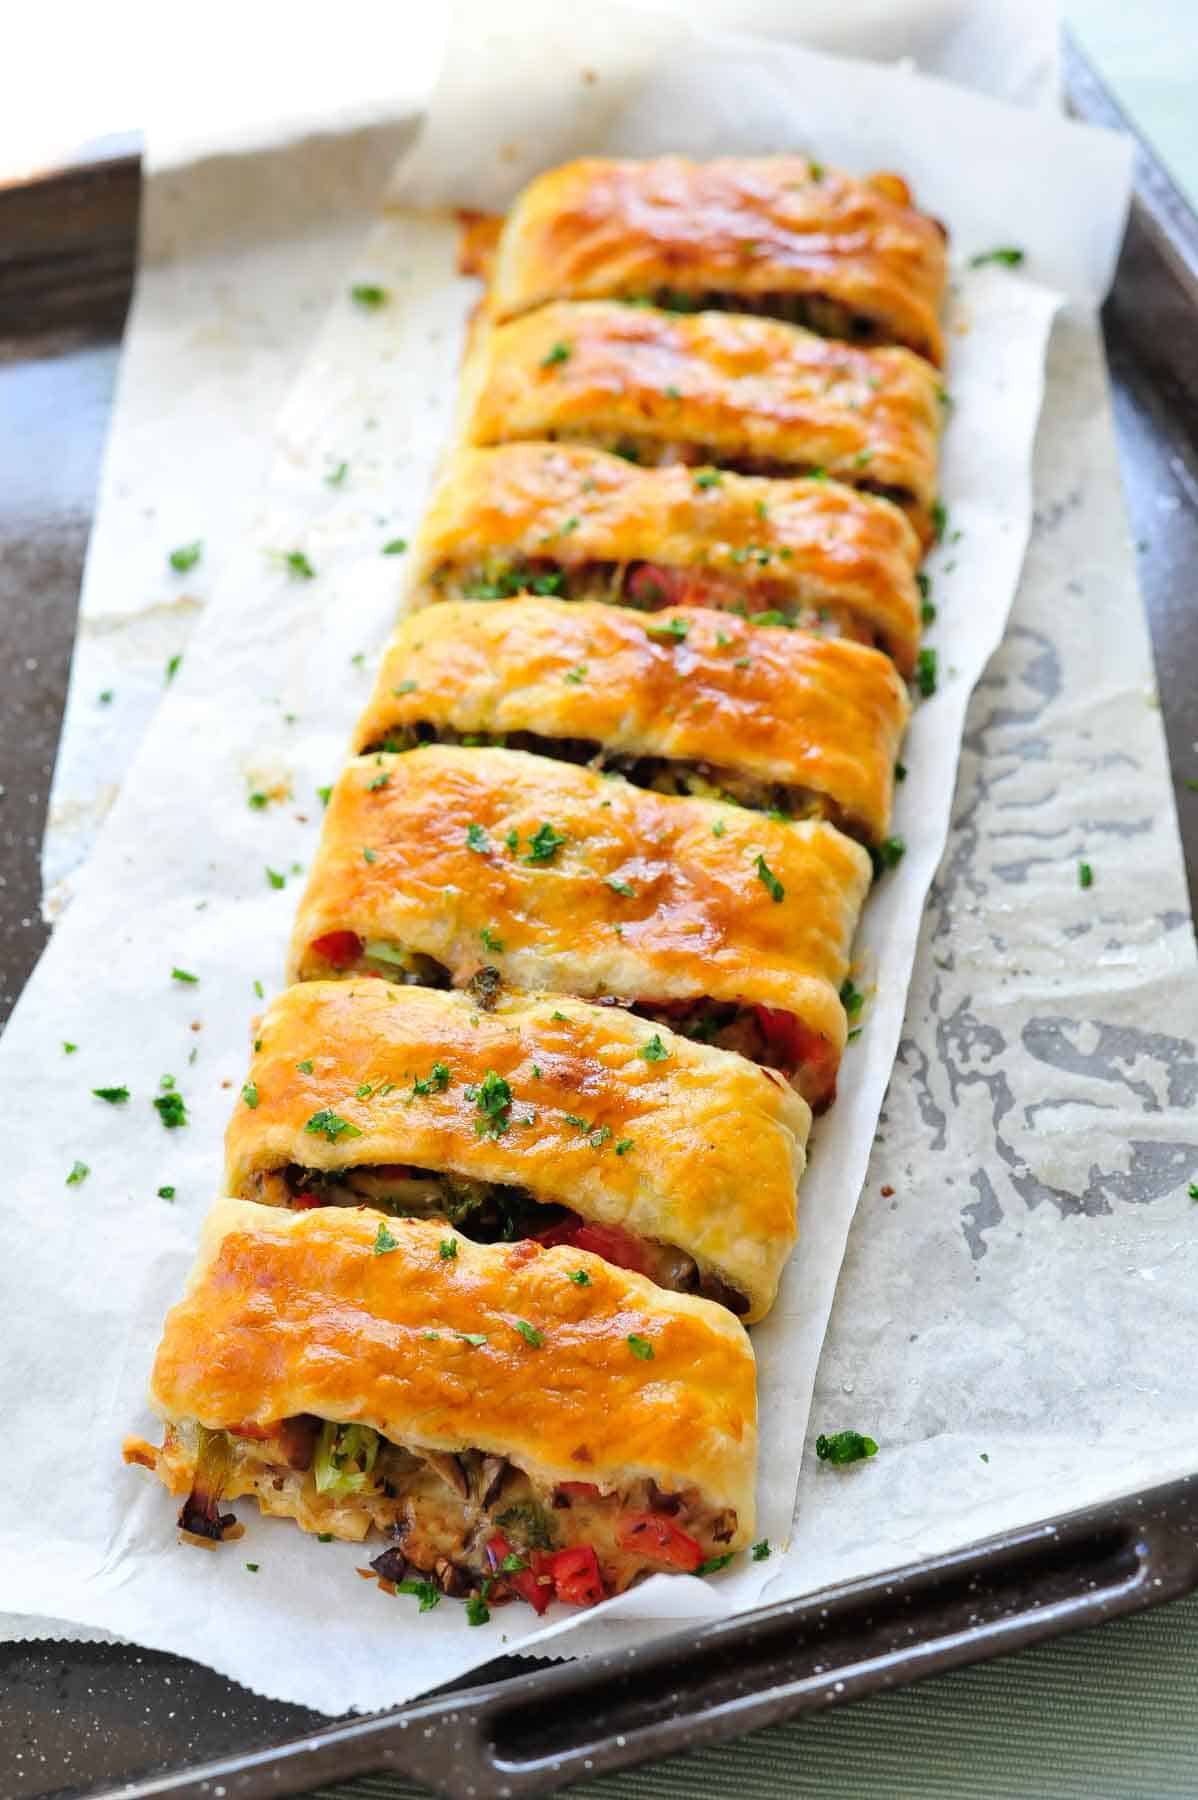 Puff pastry strudel with vegetable and cheese